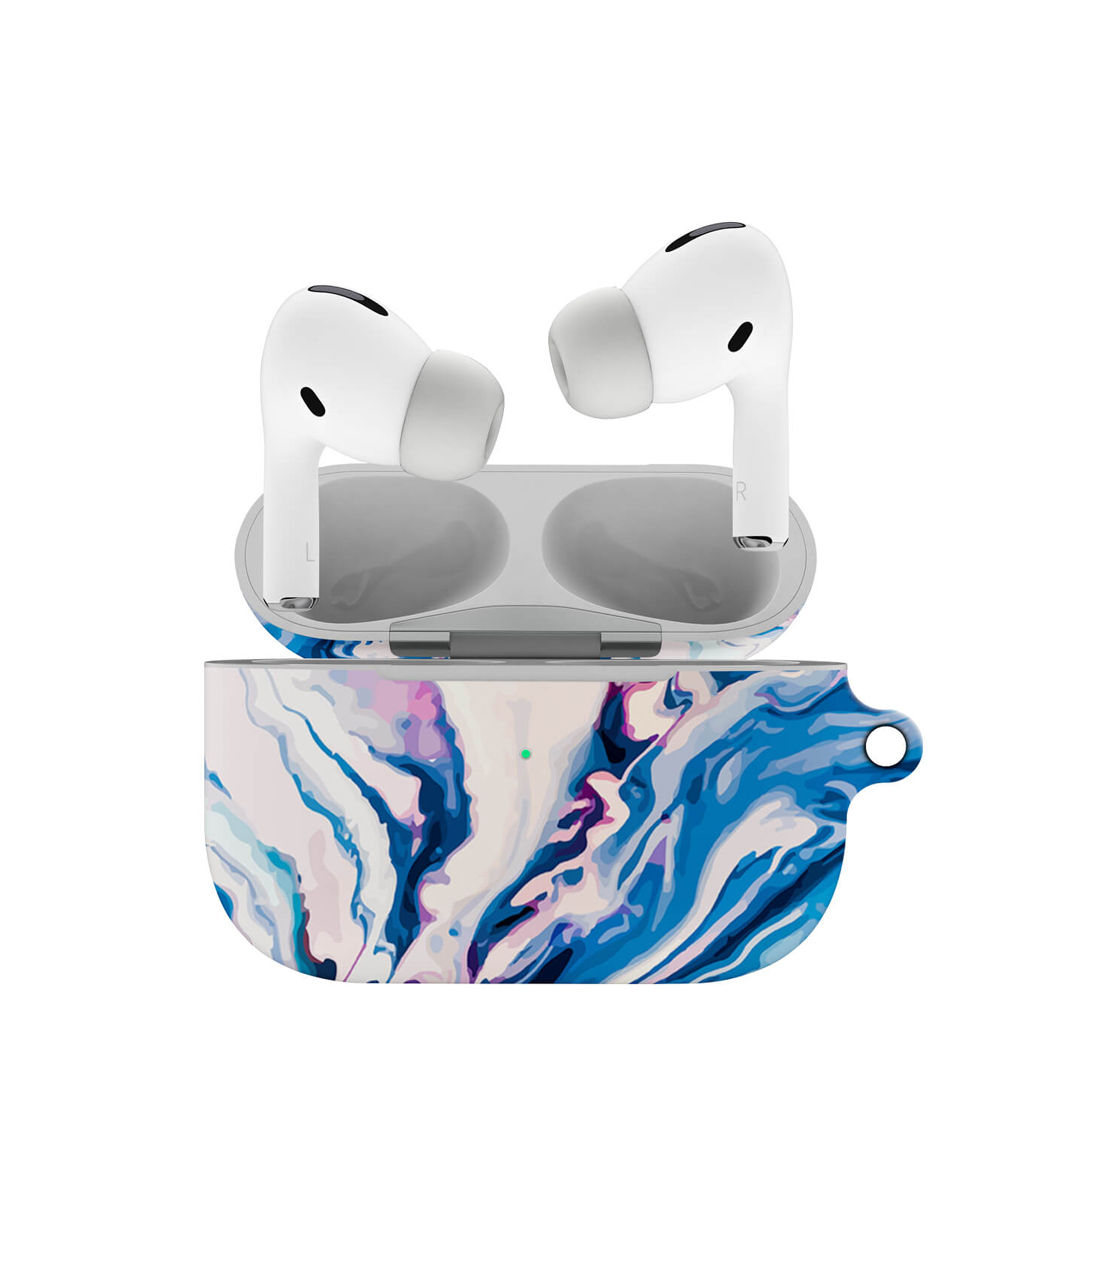 Buy Liquid Funk Pinkblue - Hard Shell Airpod Pro Case Airpod Cases Online